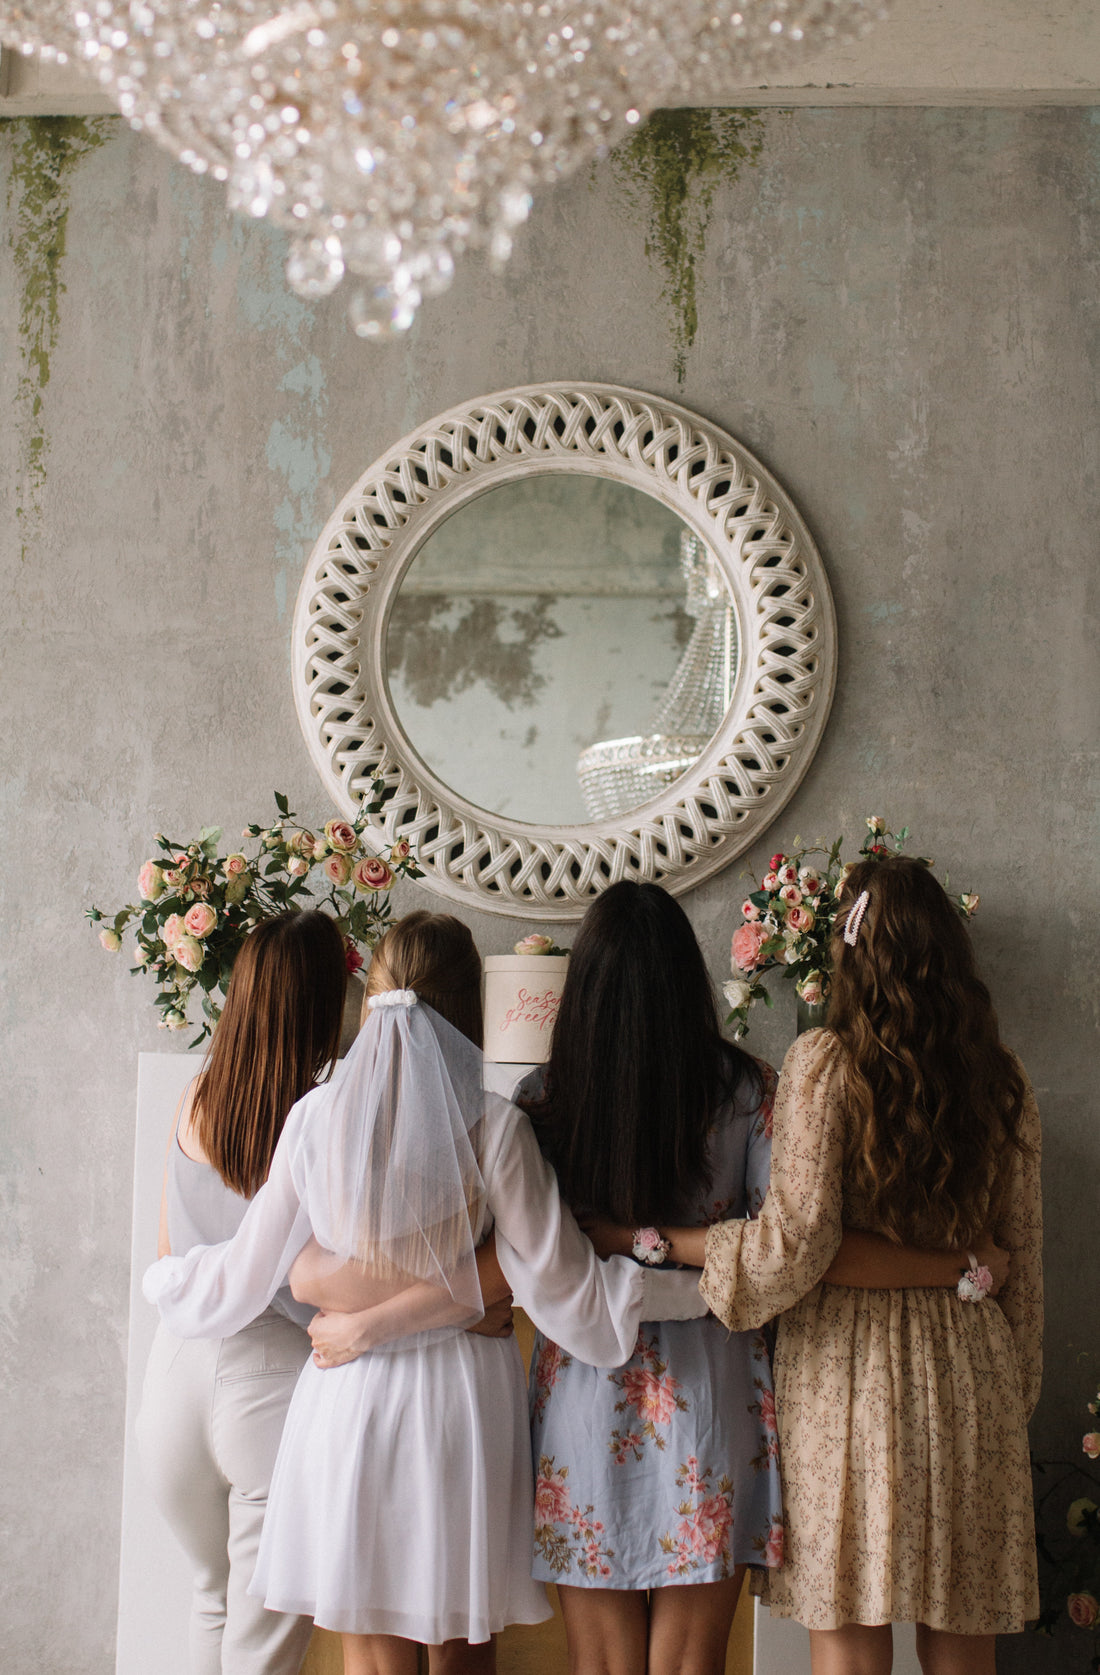 Choosing Your Bridal Squad: Picking Bridesmaids Made Easy